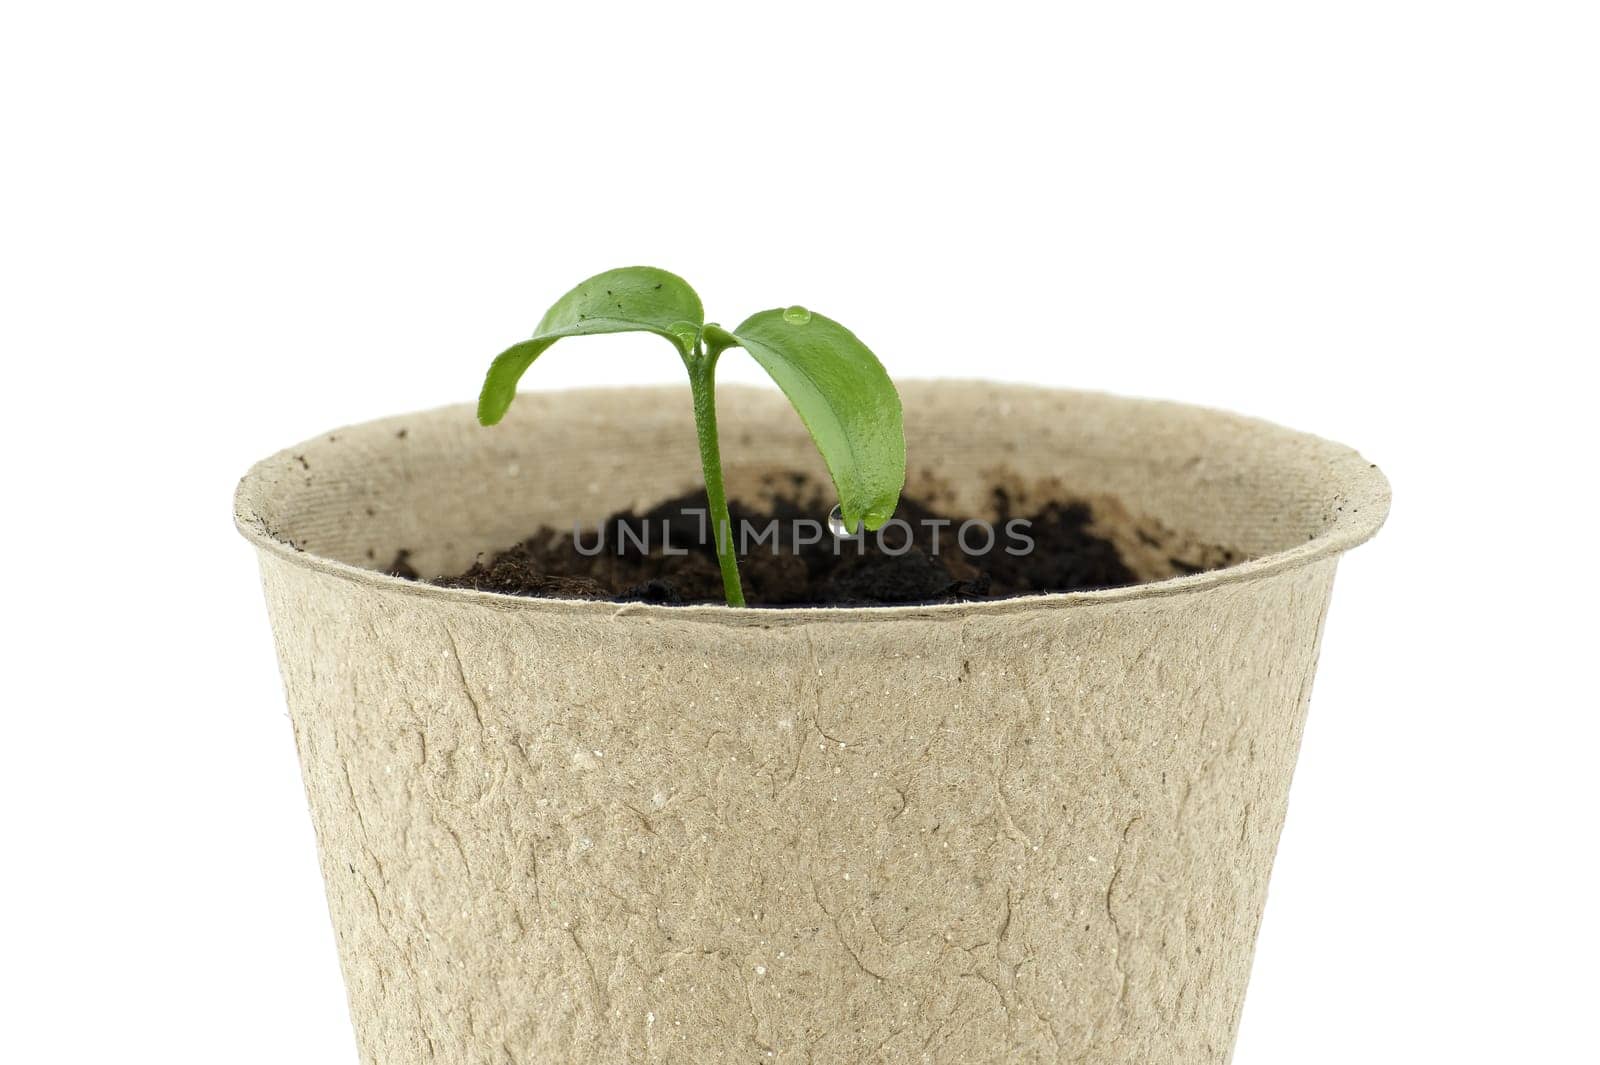 From biodegradable pot set on white, green seedling is emerging by NetPix